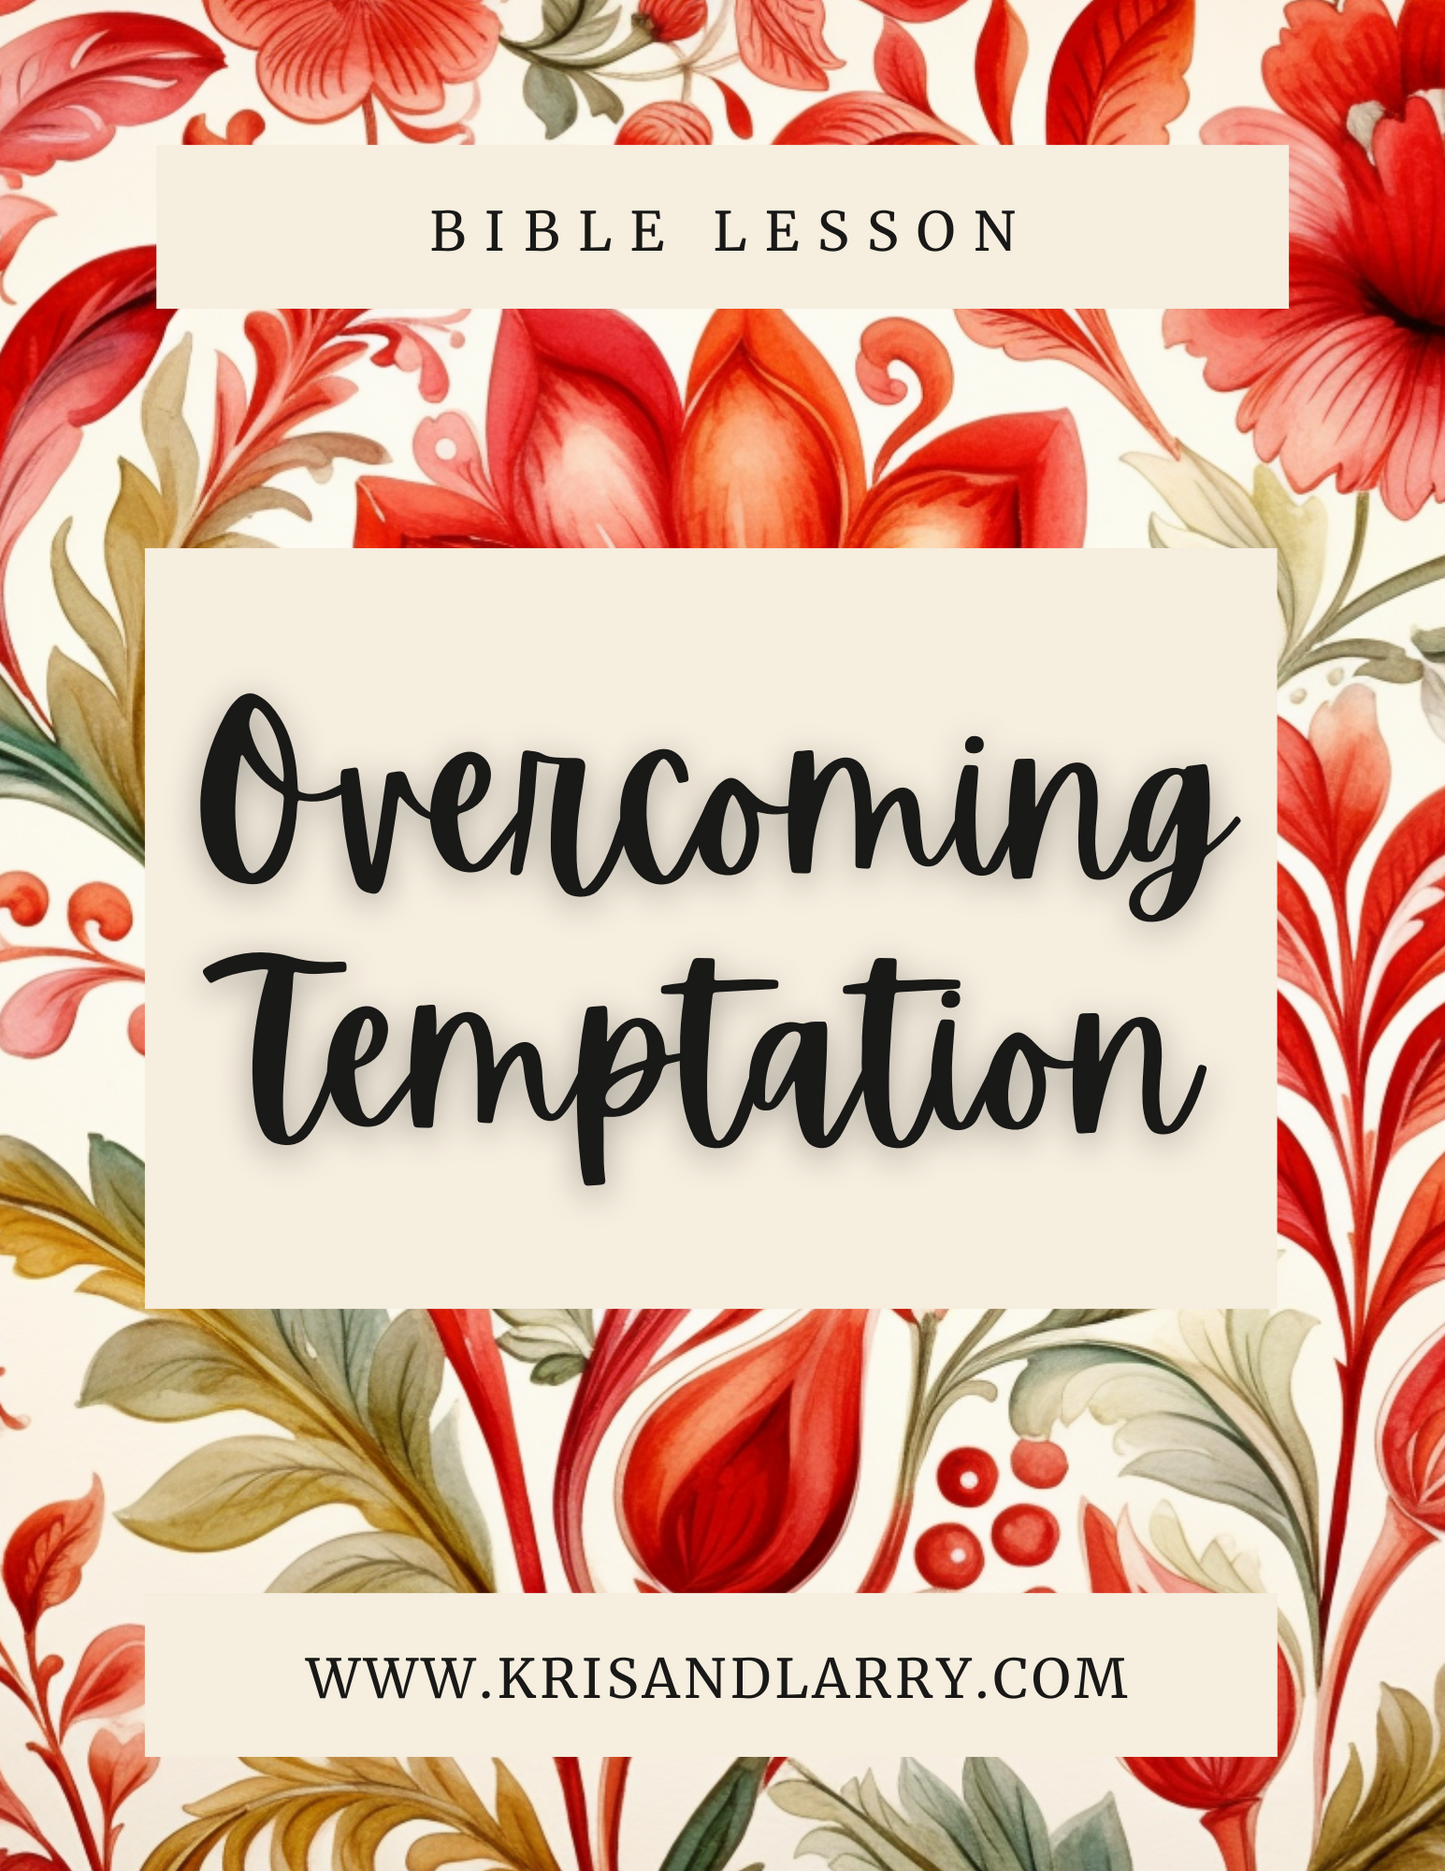 Overcoming Temptation Bible Lesson, 17 Page Christian Bible Study - Downloadable